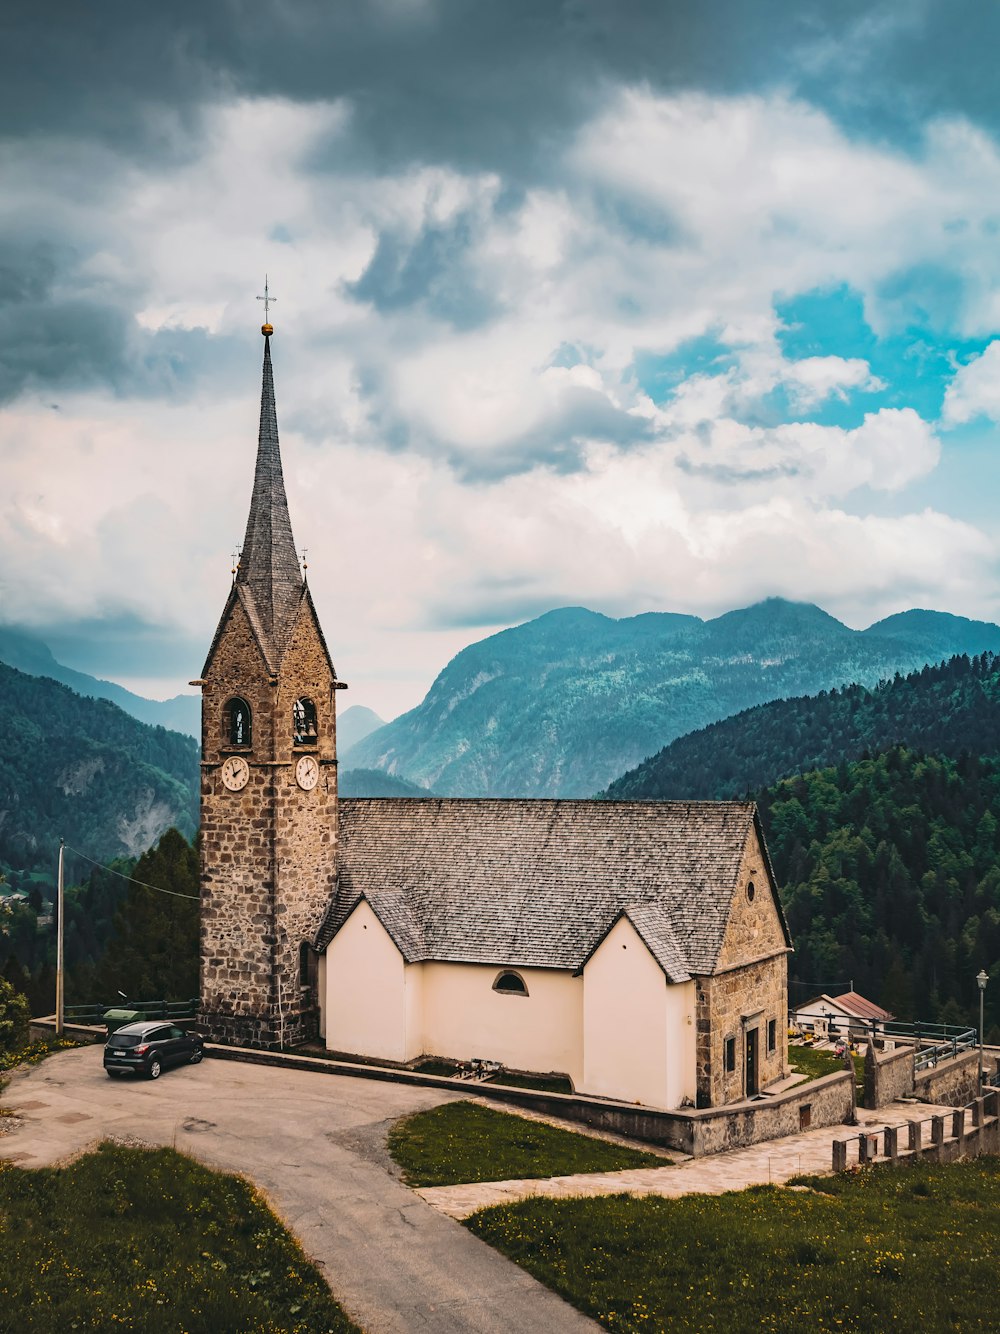 an old church with a steeple surrounded by mountains